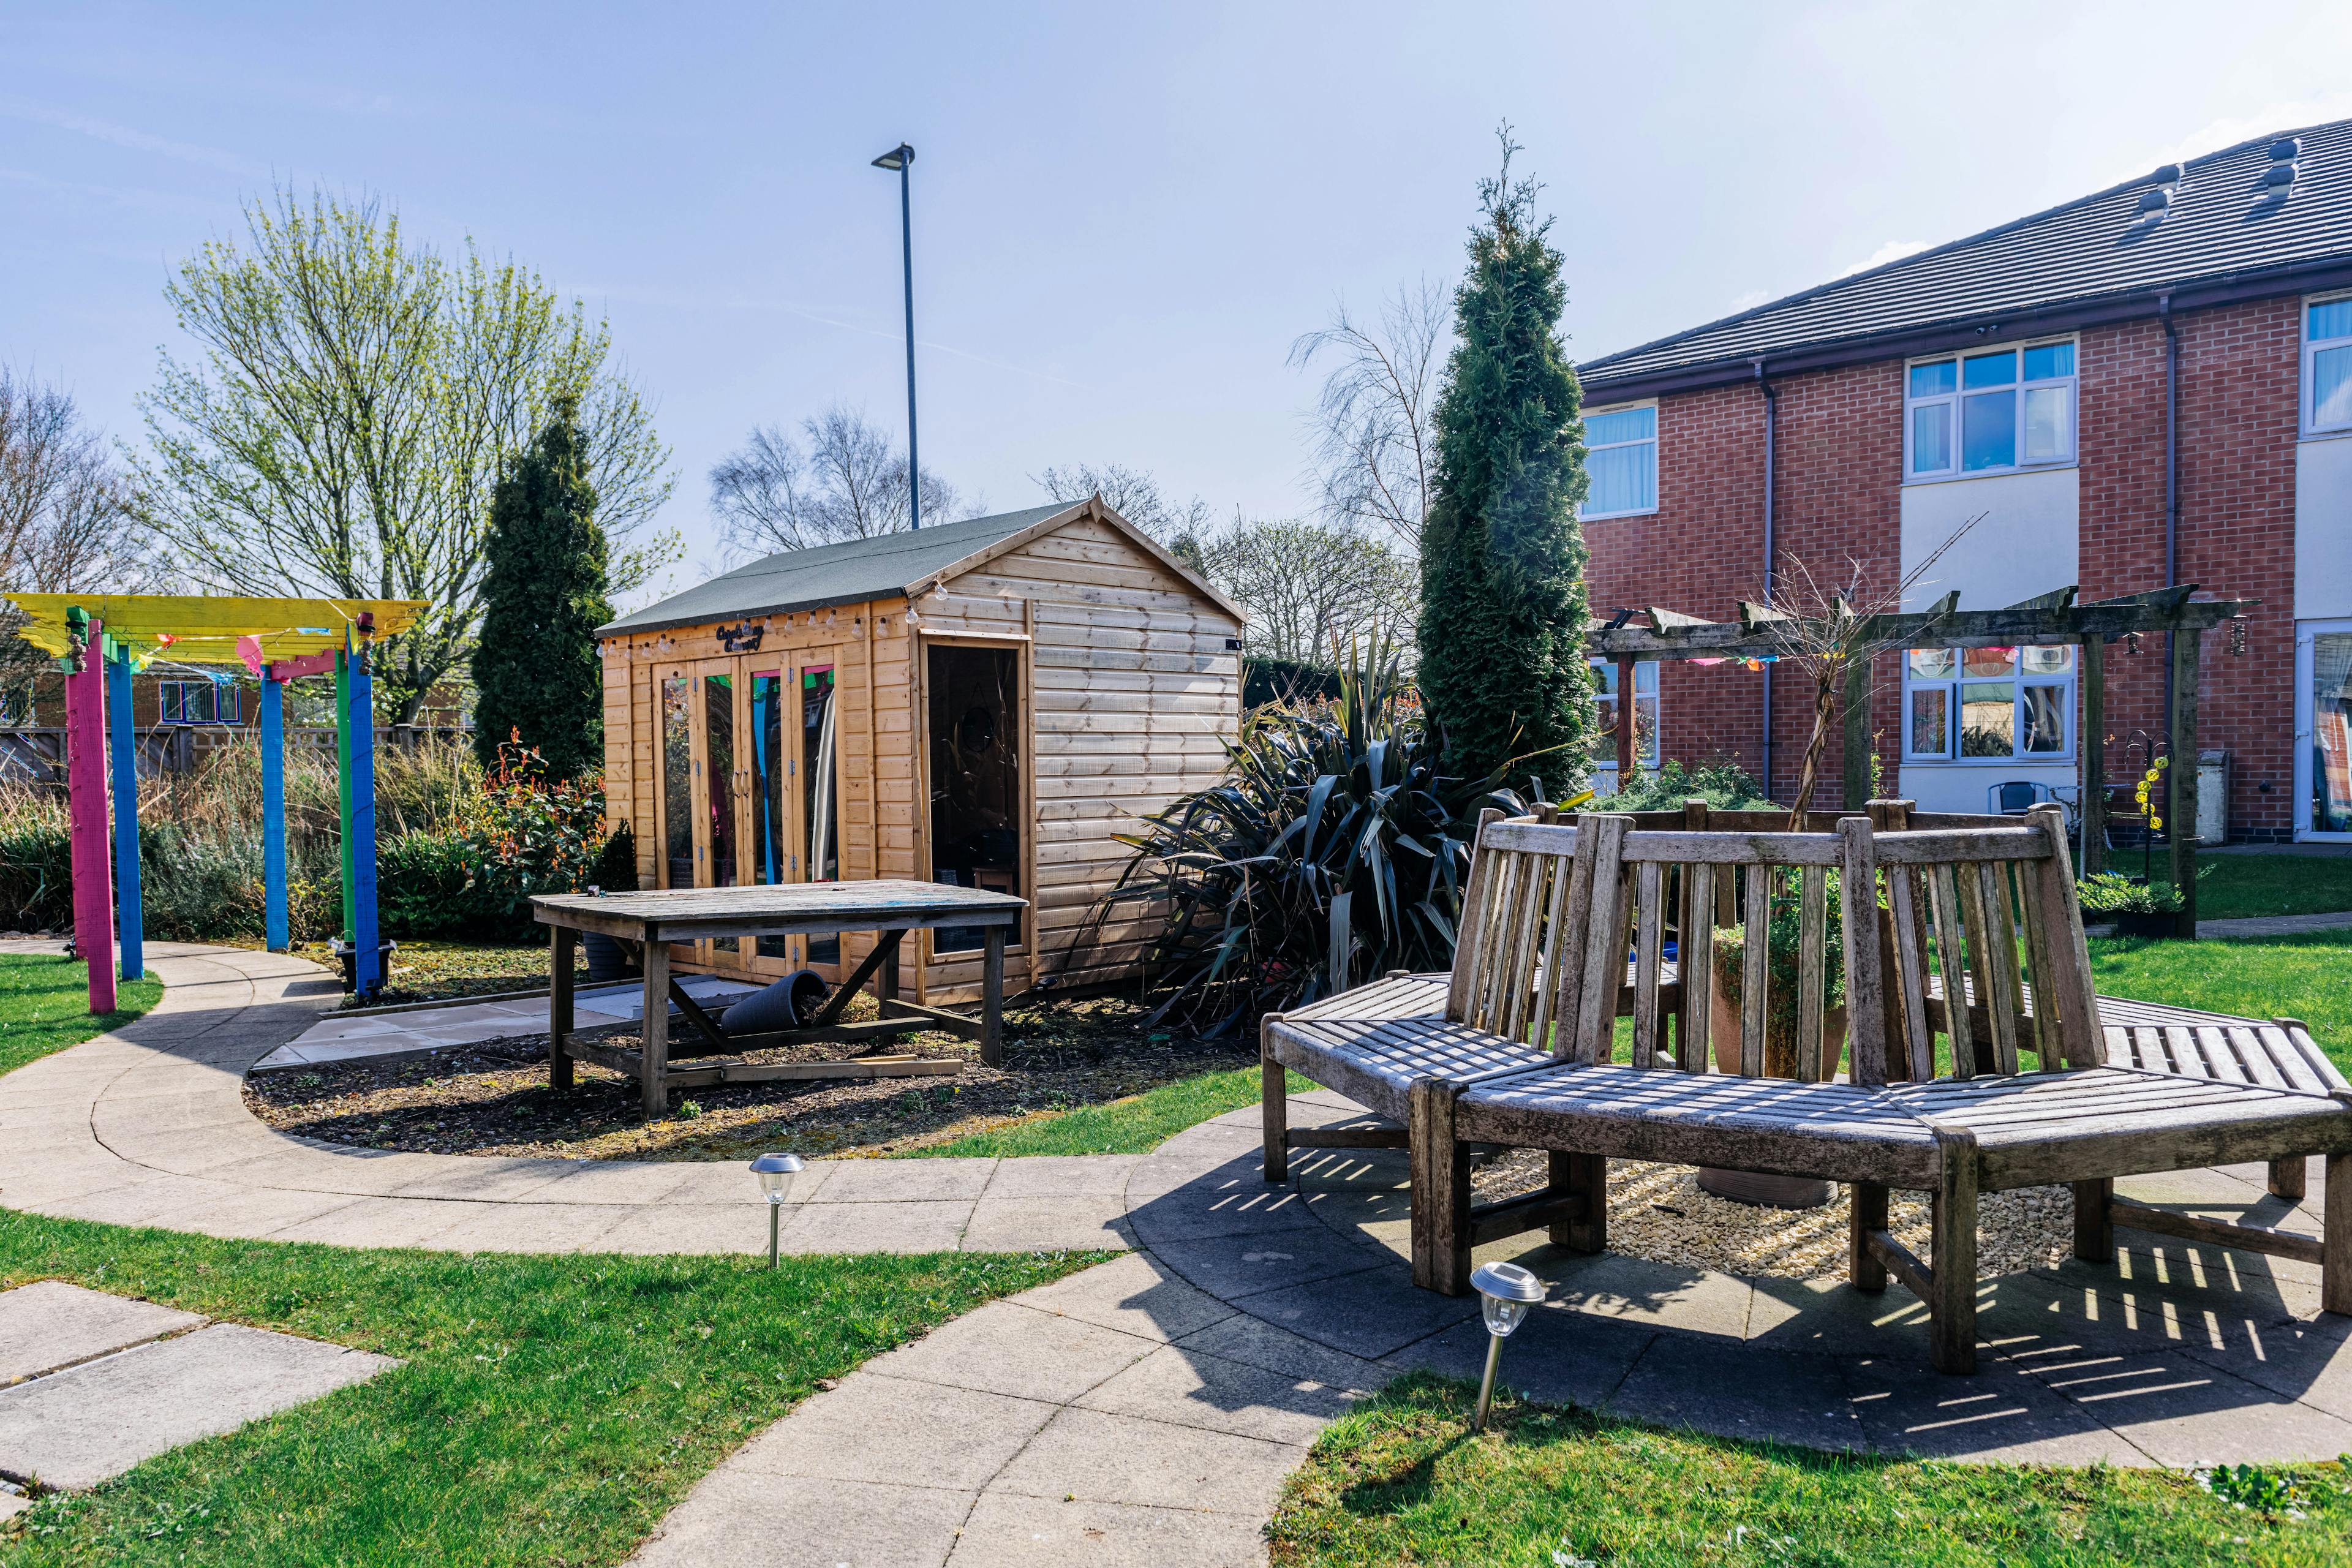 Garden of Lawton Rise Care Home in Stoke-on-Trent, Staffordshire